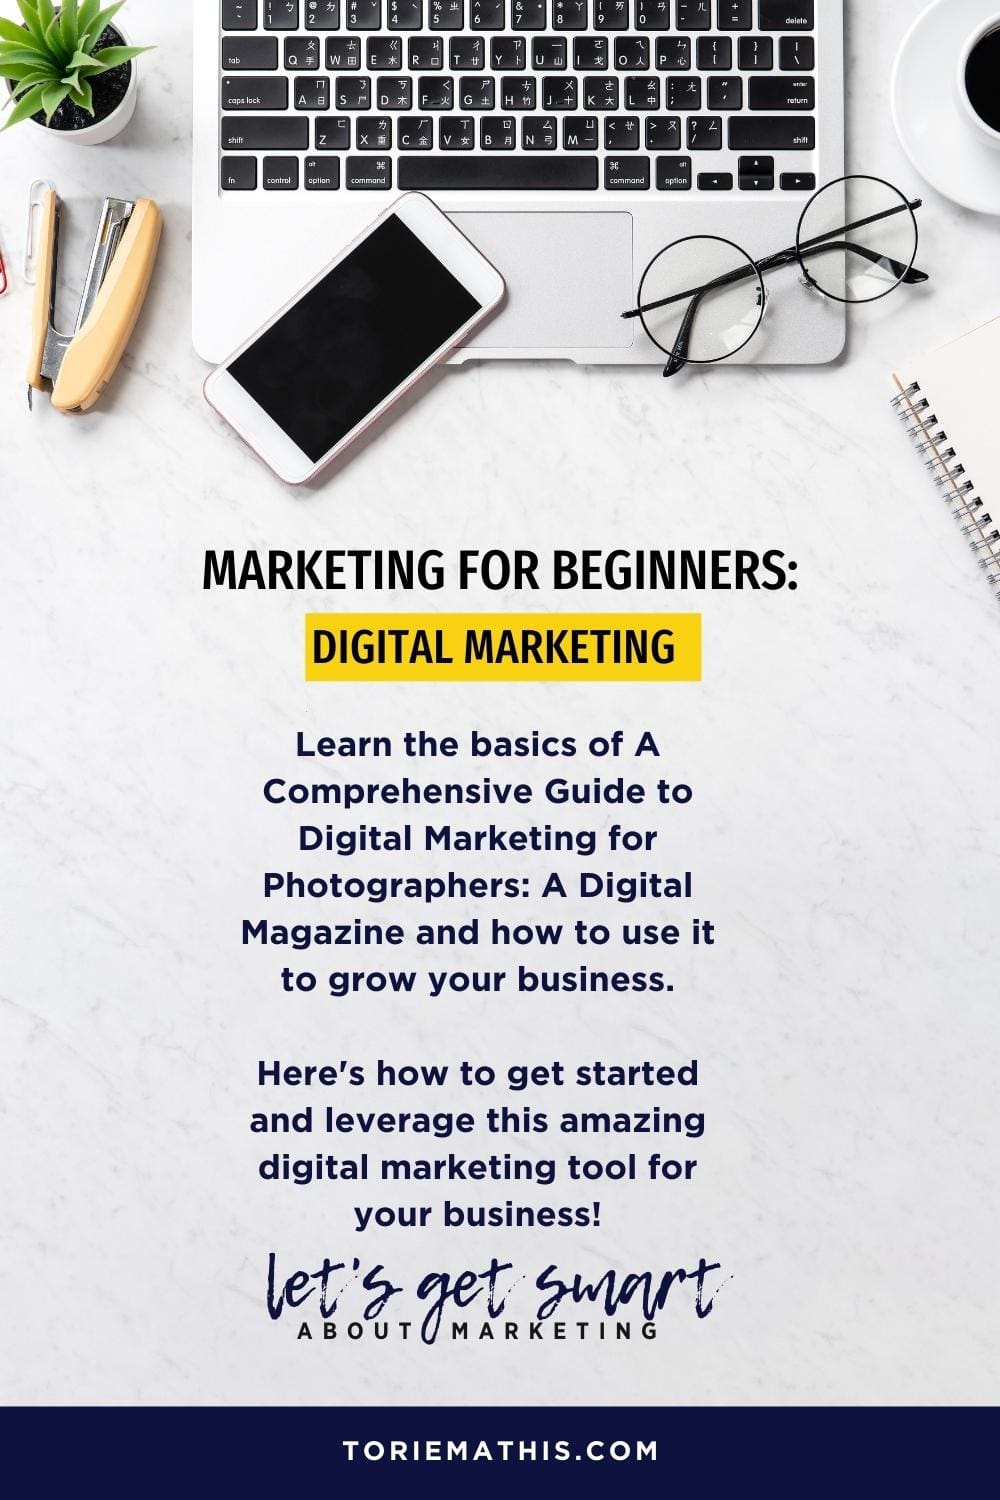 A Comprehensive Guide to Digital Marketing for Photographers